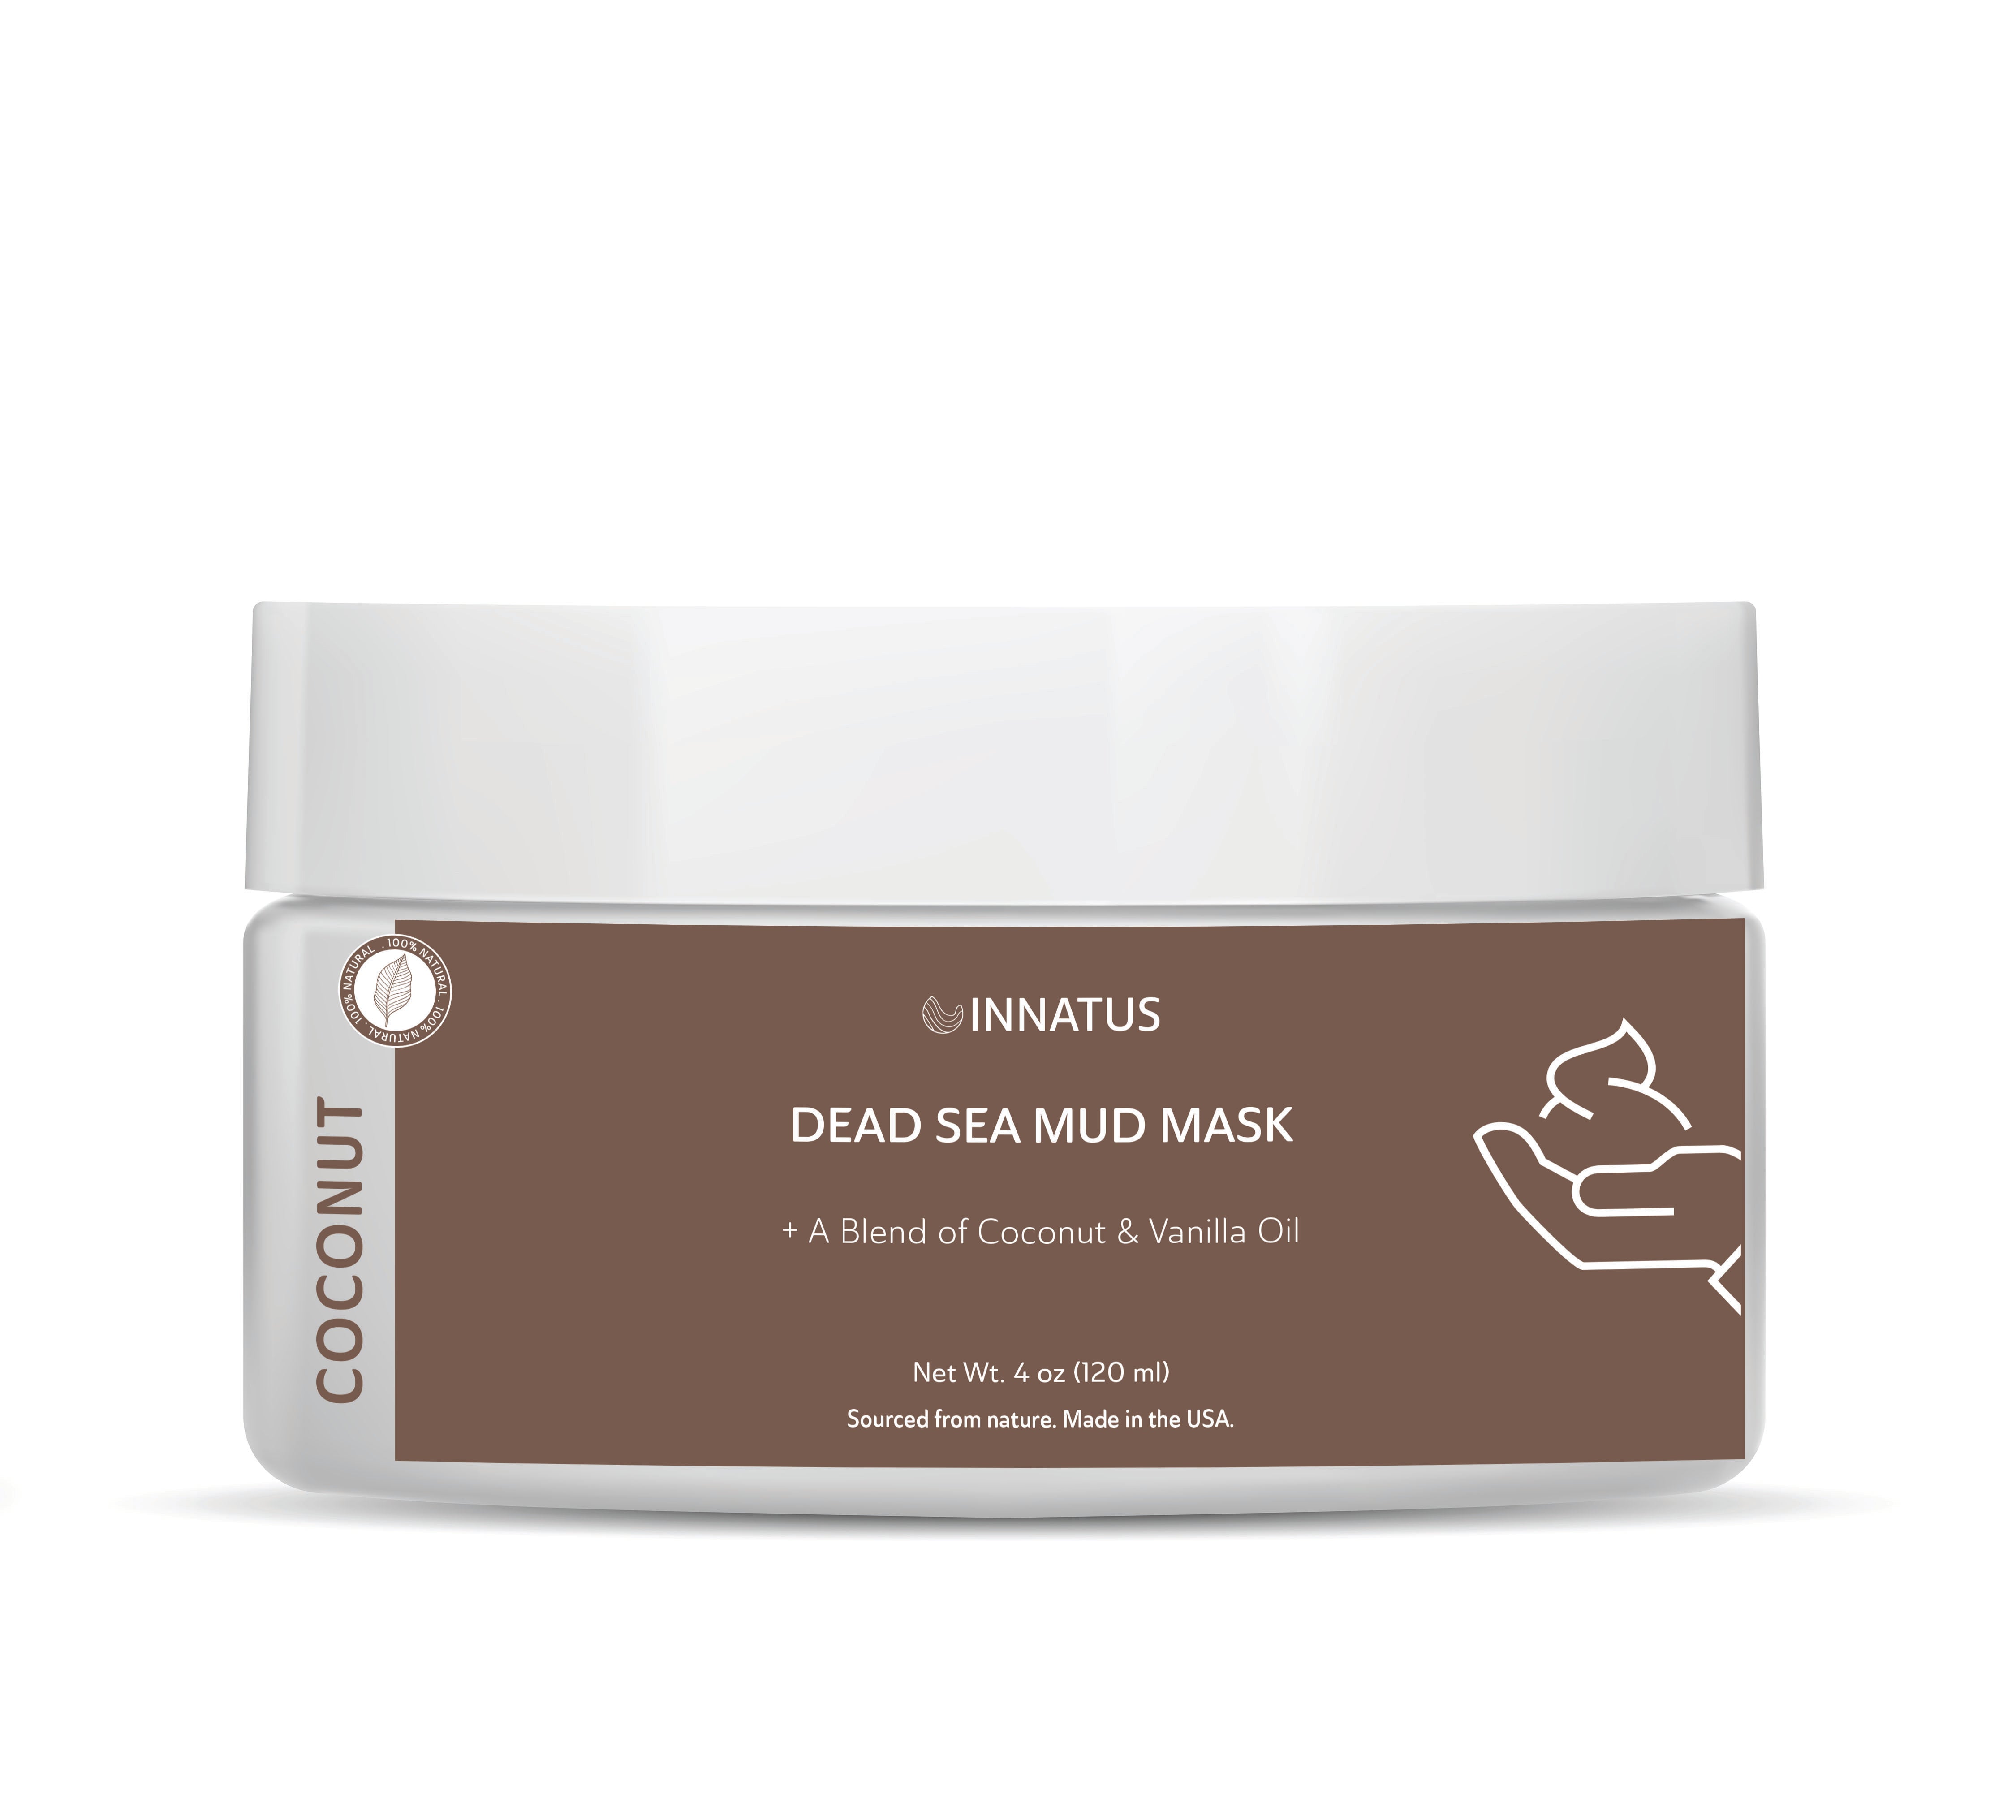 Dead Sea Mud Mask with Coconut Oil Blend